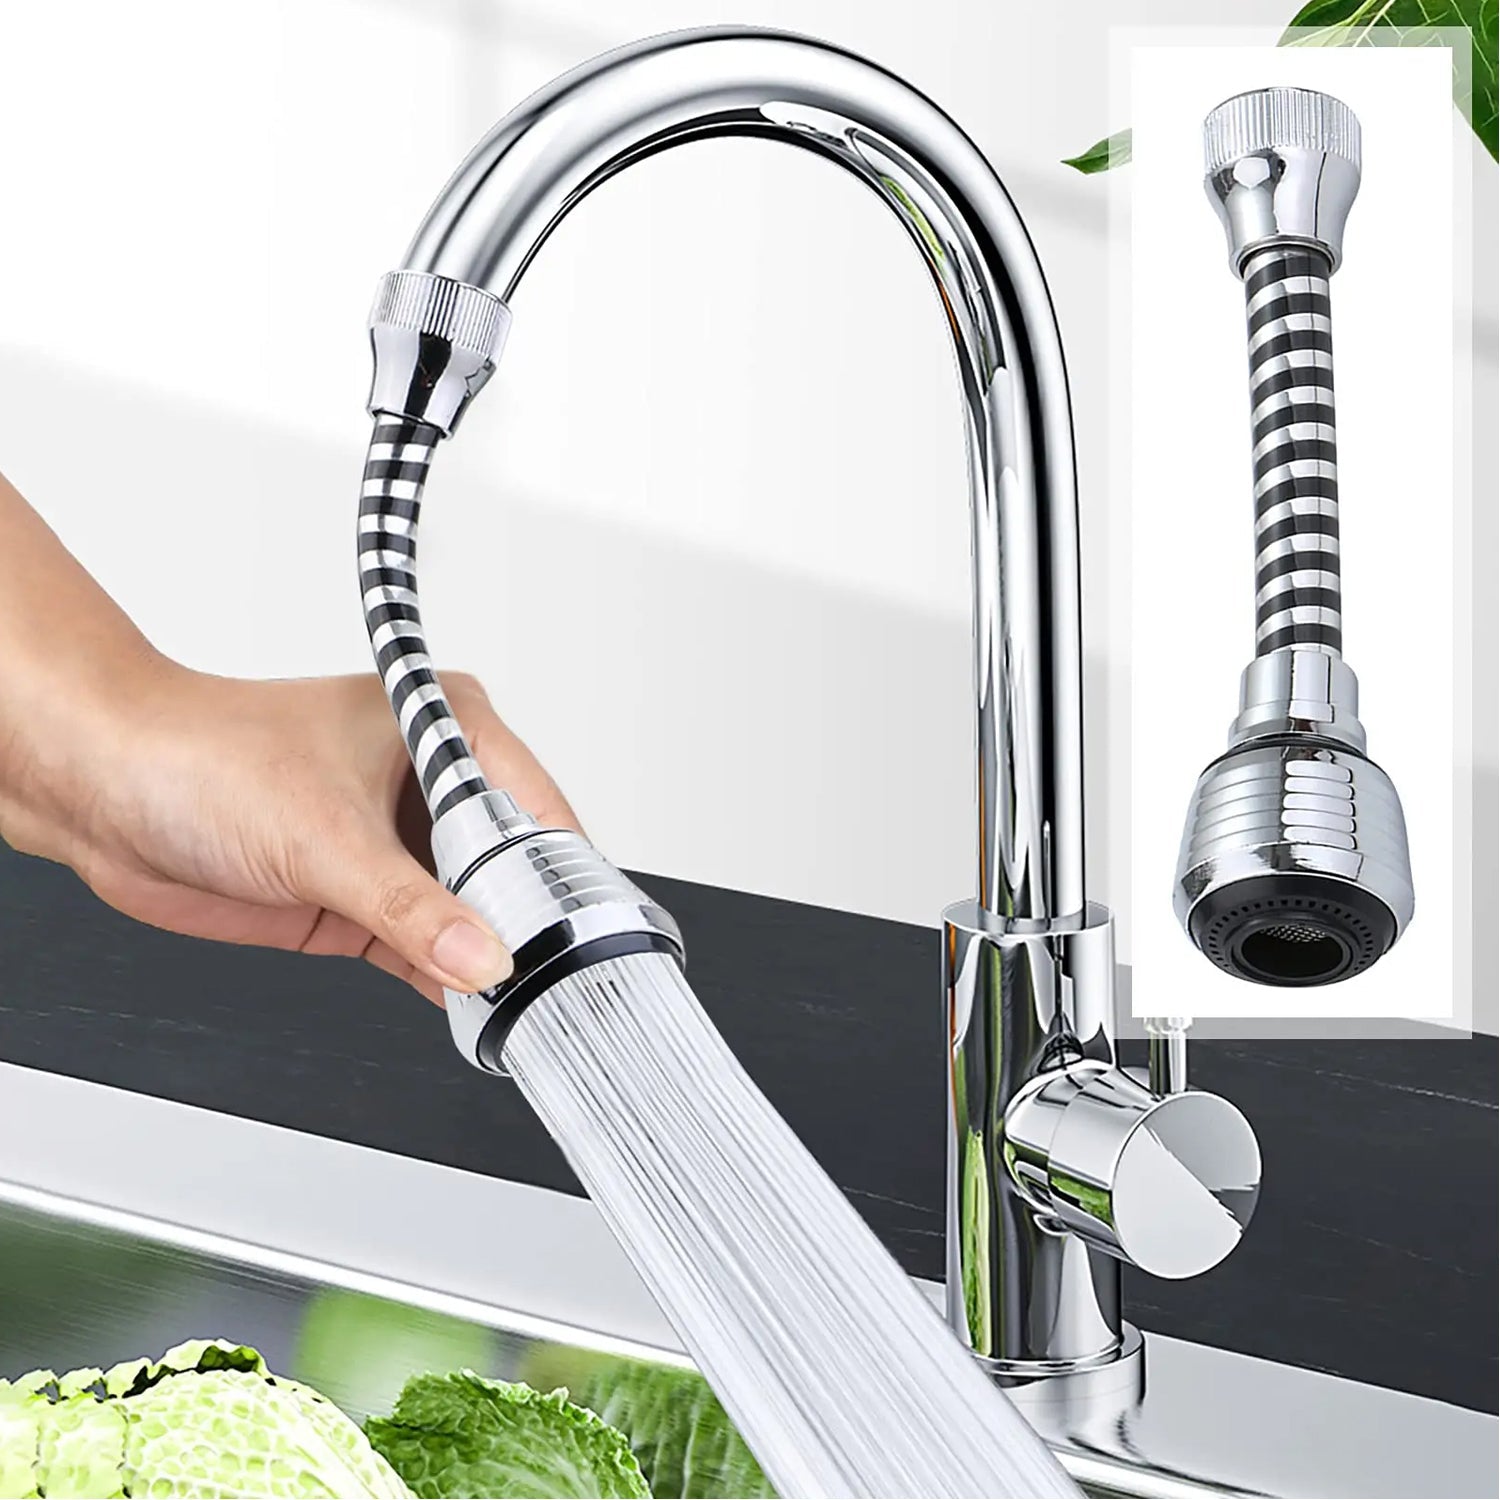 0550  Tap Spray Head Kitchen Faucet Extender Universal Faucet Spray Head Adapter Faucet Sprayer Attachment Jaywayne Kitchen Faucet Sprayer Movable Kitchen Faucet Head 360° Rotatable Anti -Splash Tap Water Saving Faucet for Kitchen (1 Pc)